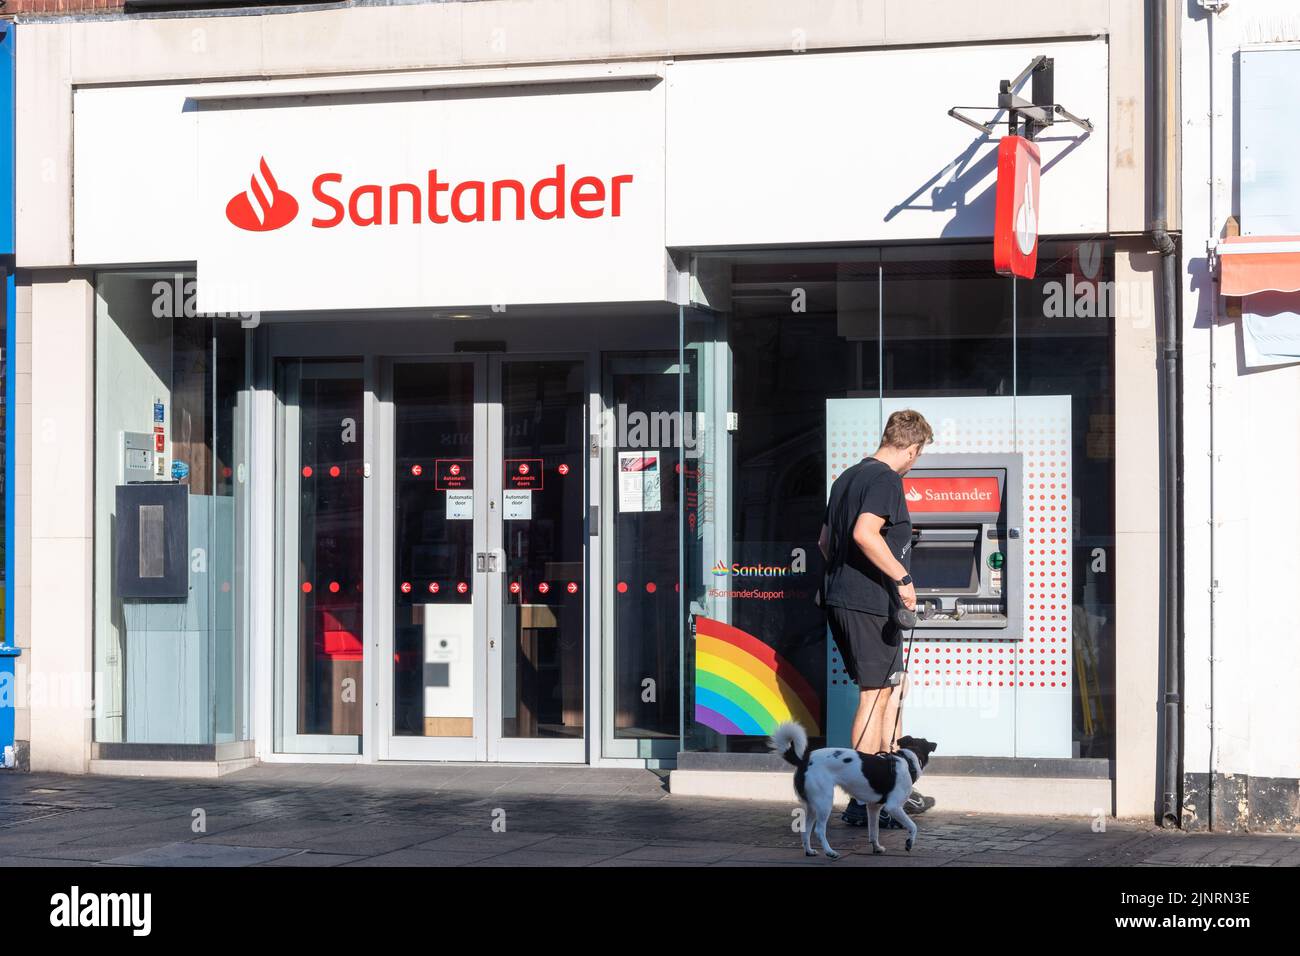 Santander bank, a high street branch of the bank with a man using the ATM machine, UK Stock Photo